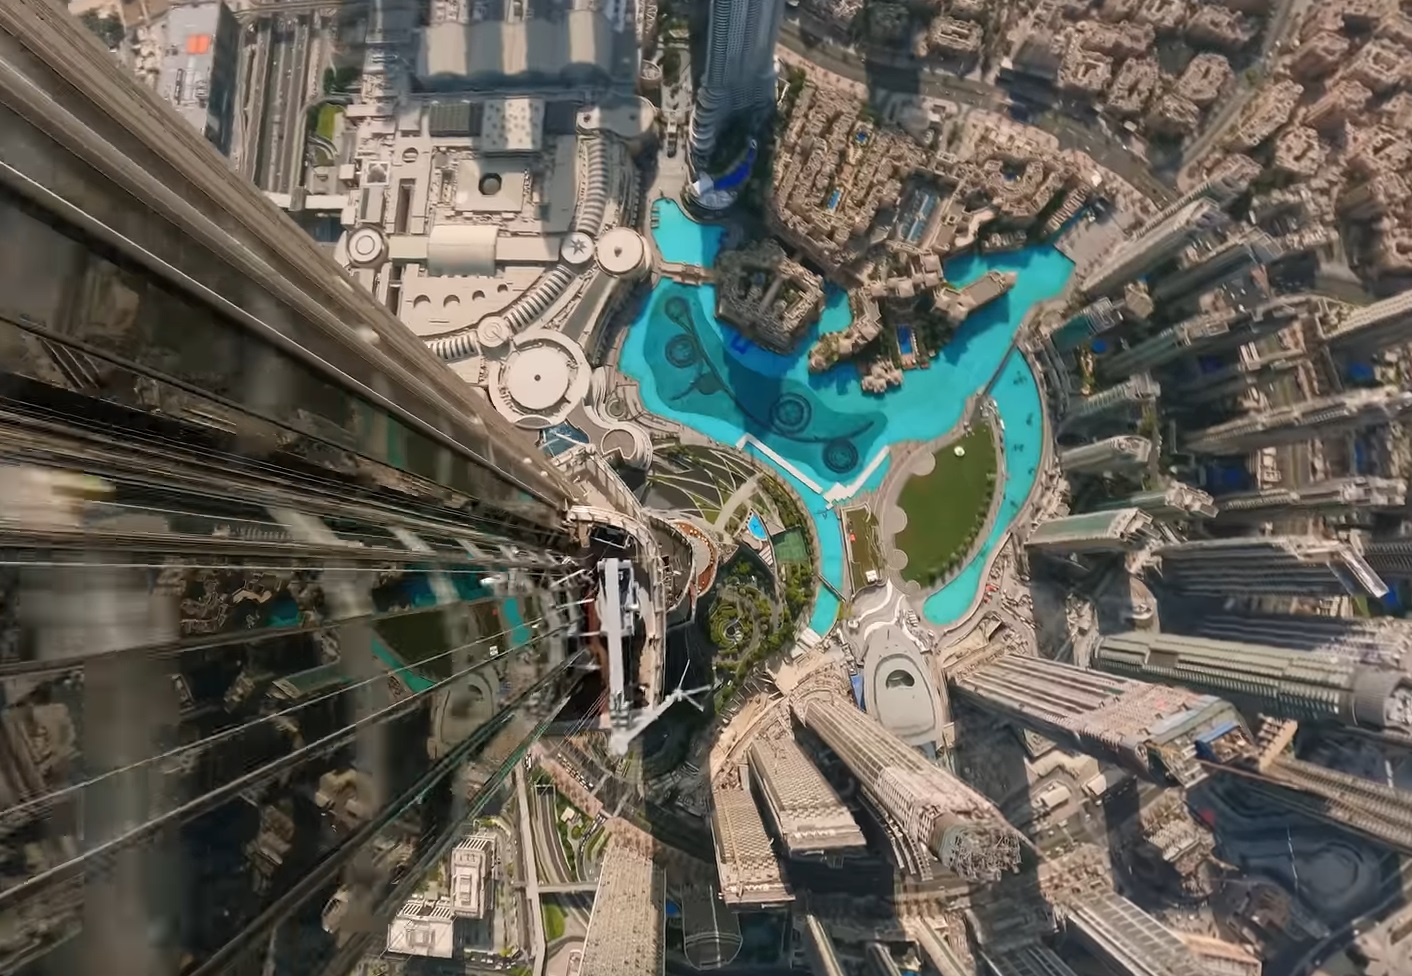 Diving The World's Tallest Building